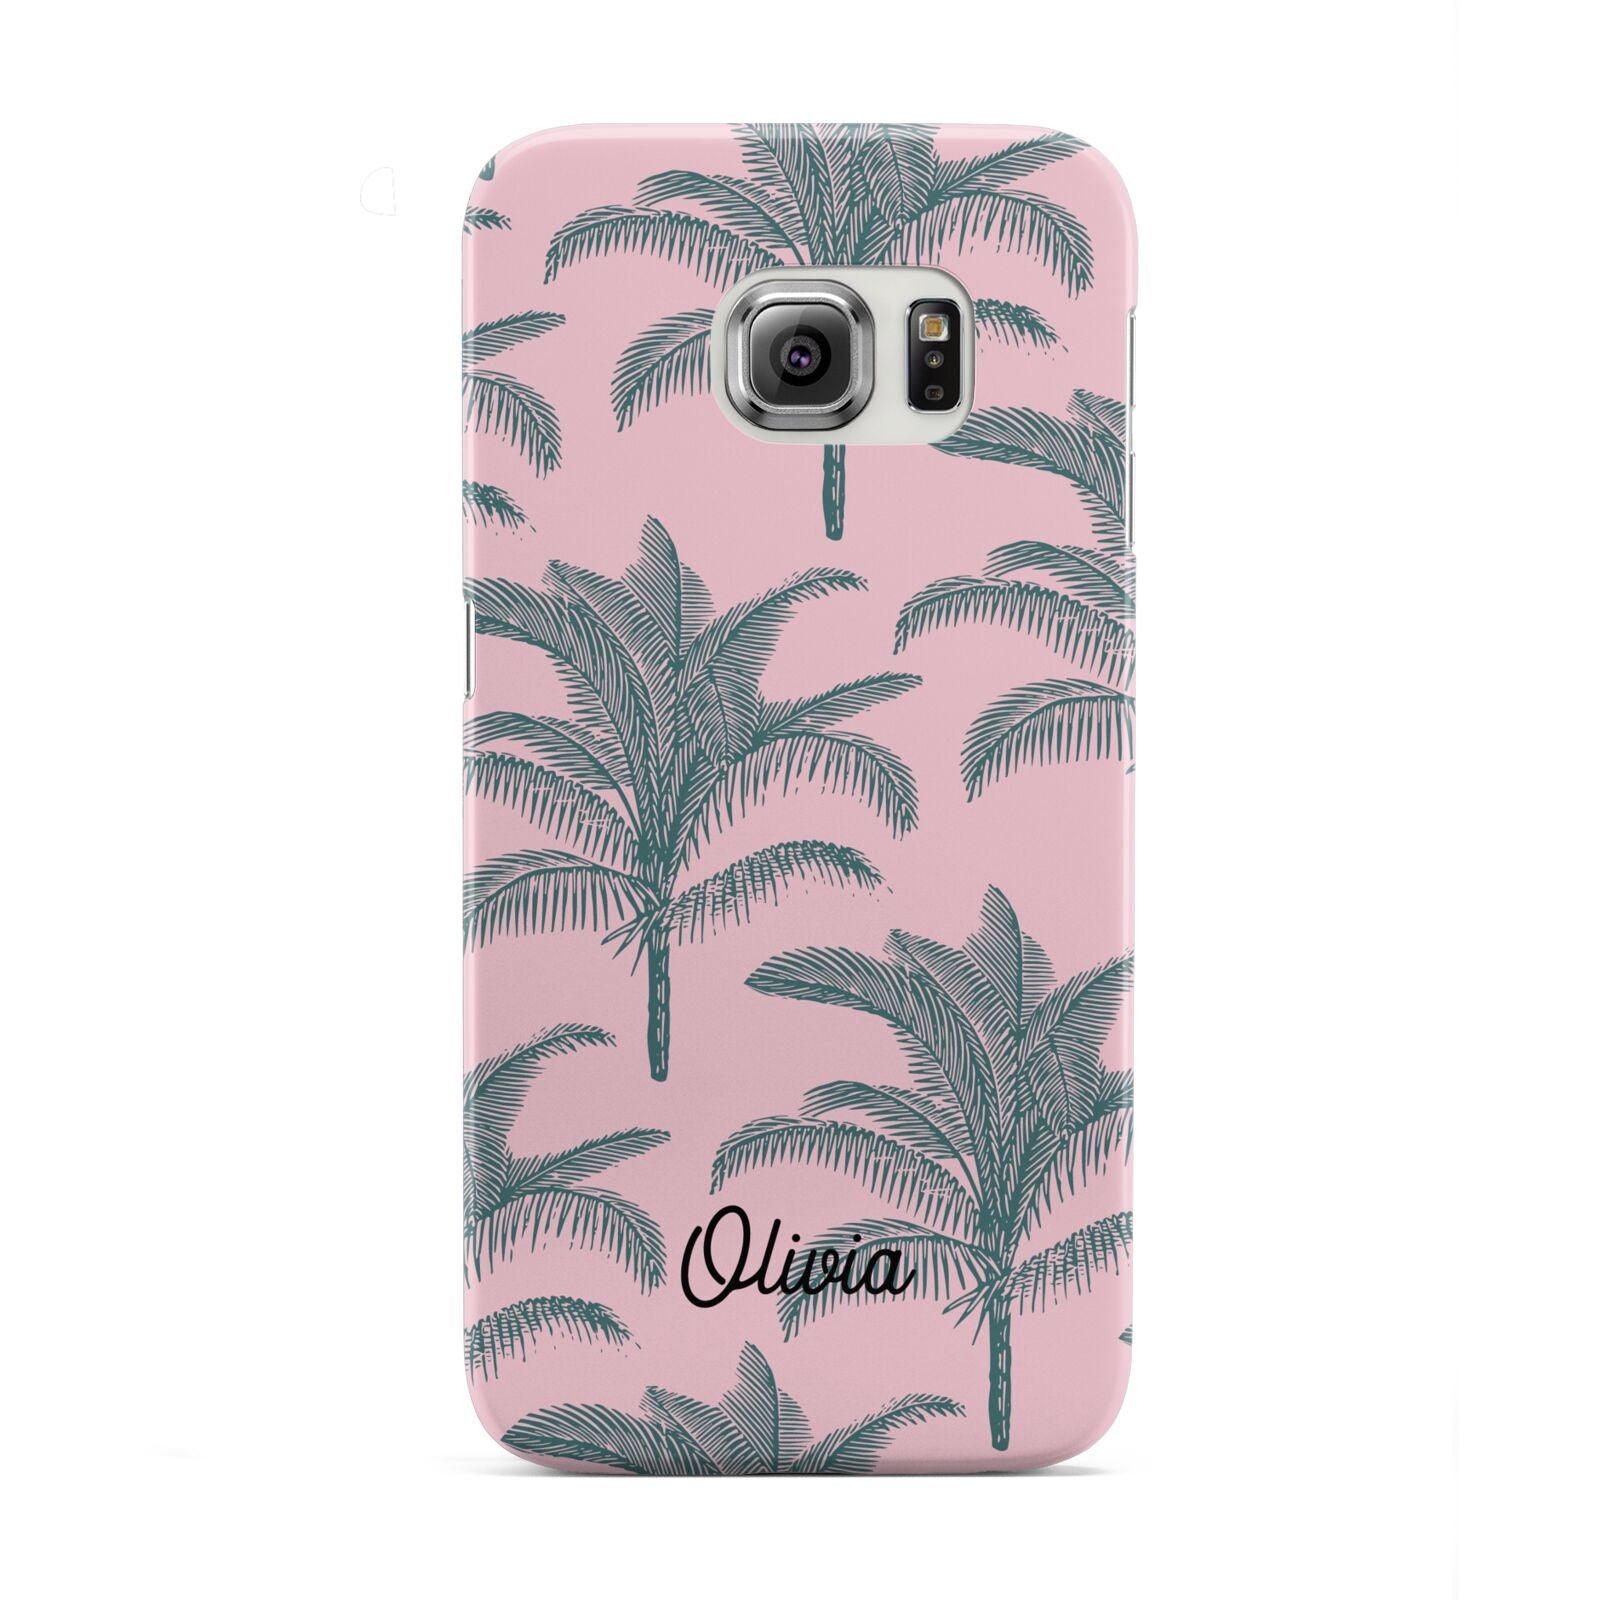 Personalised Palm Samsung Galaxy S6 Edge Case